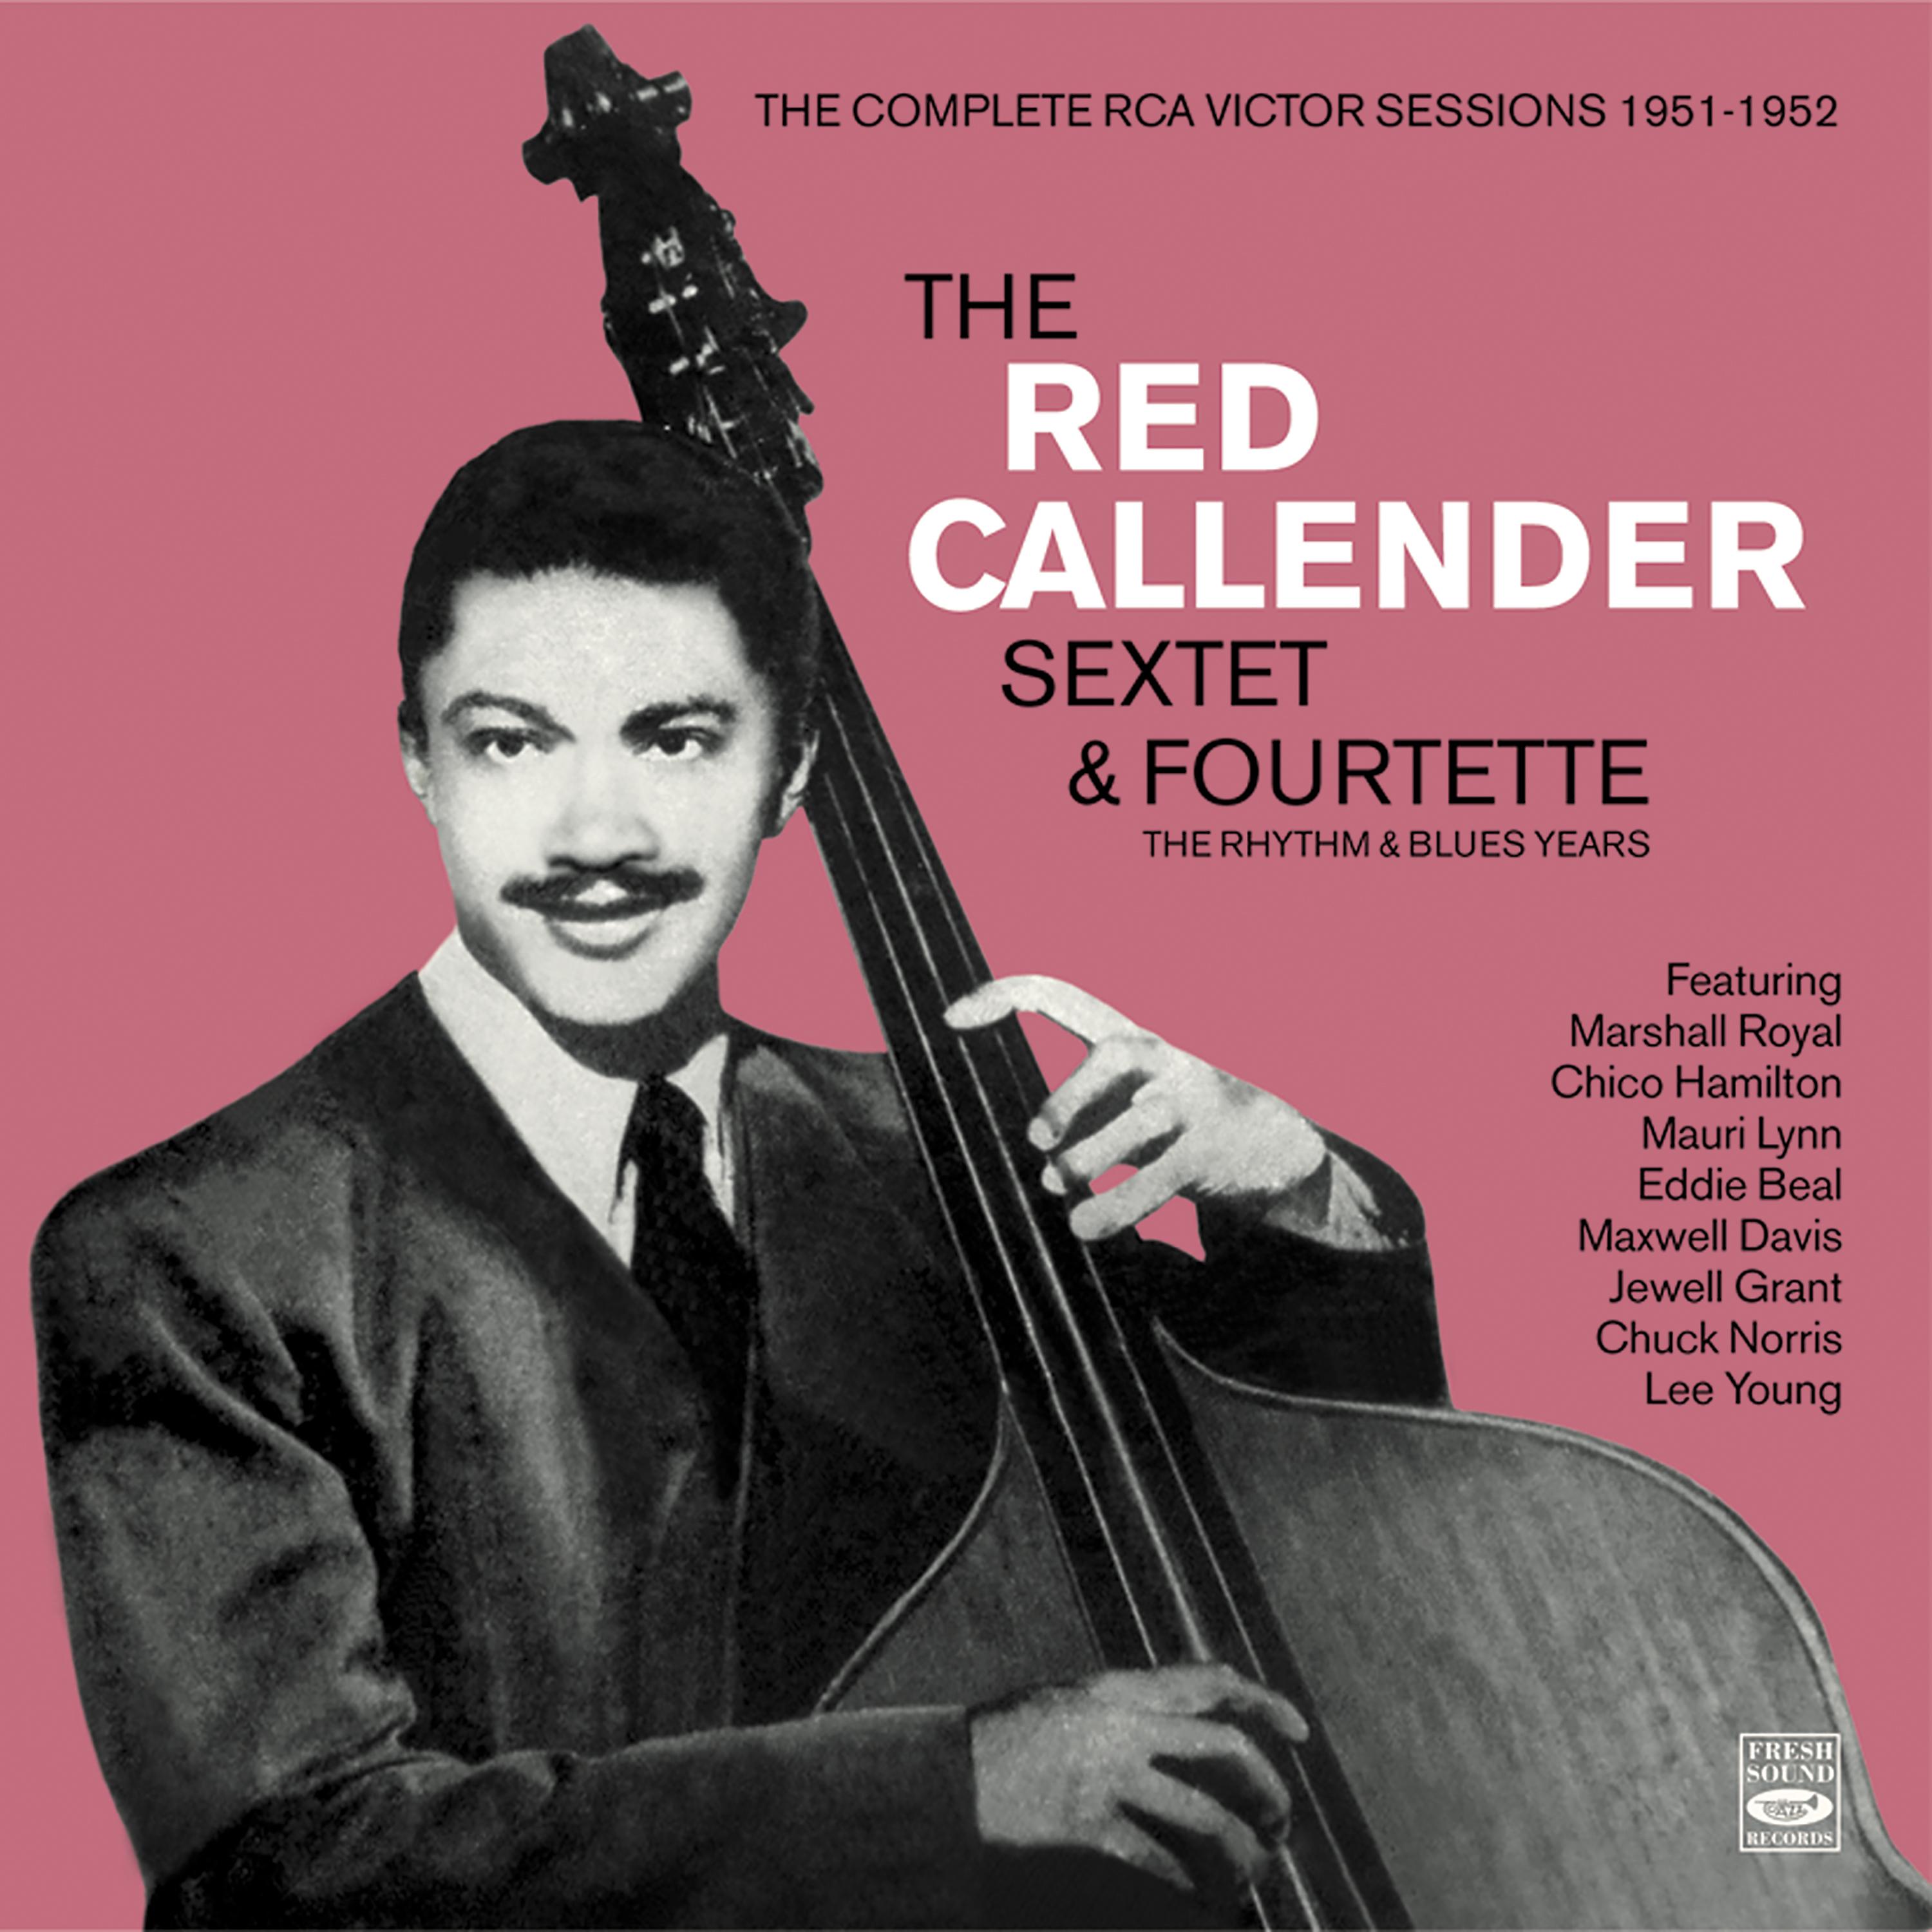 Постер альбома The Complete RCA Victor Sessions 1951-1952. The Red Callender Sextette & Fourtette. The Rhythm & Blues Years